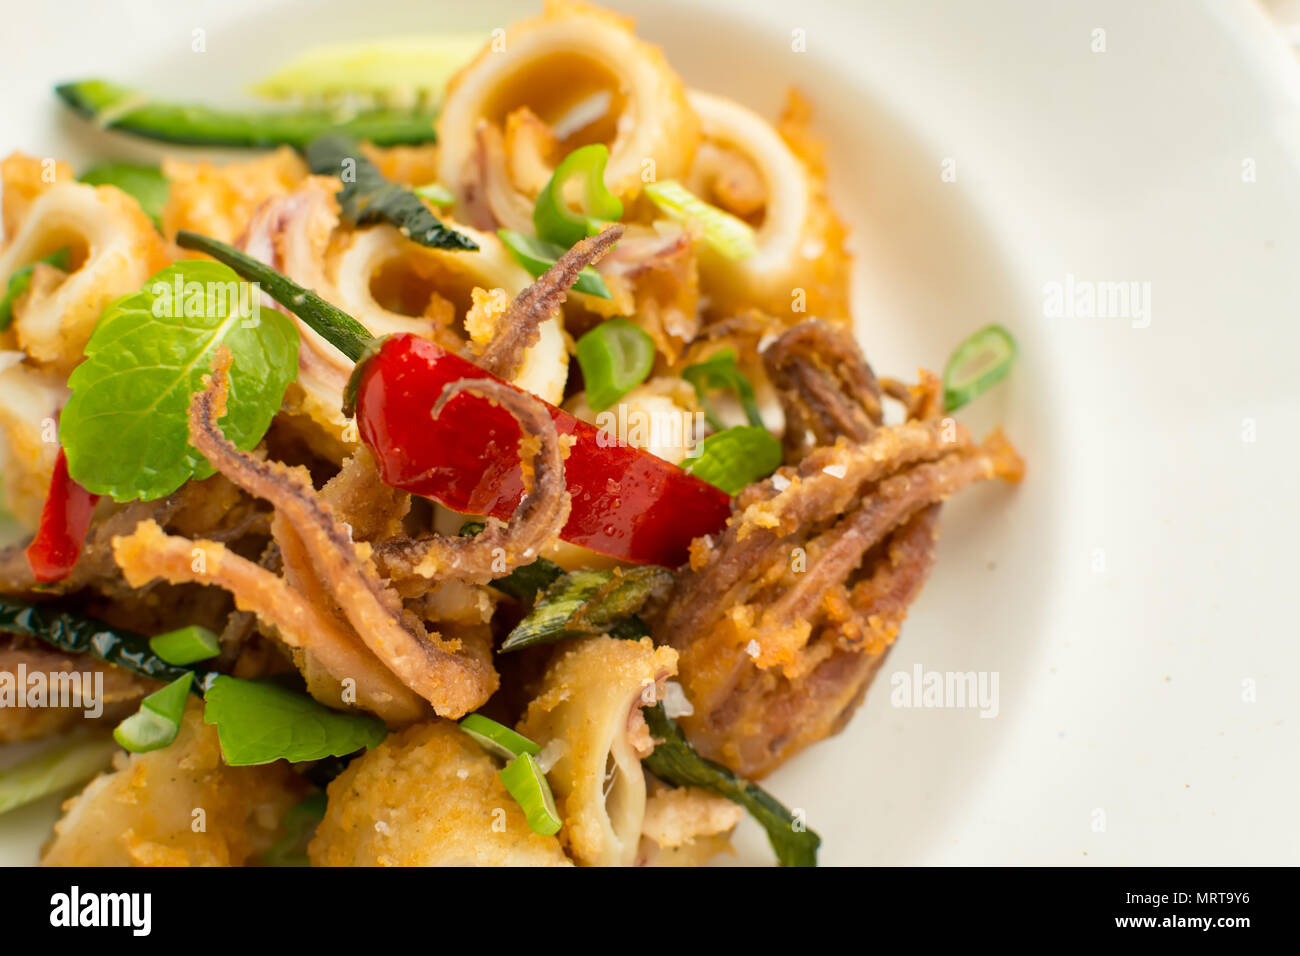 Fresh Fried Squids, Chili Pepper and Mint Leaves on White Plate Stock Photo